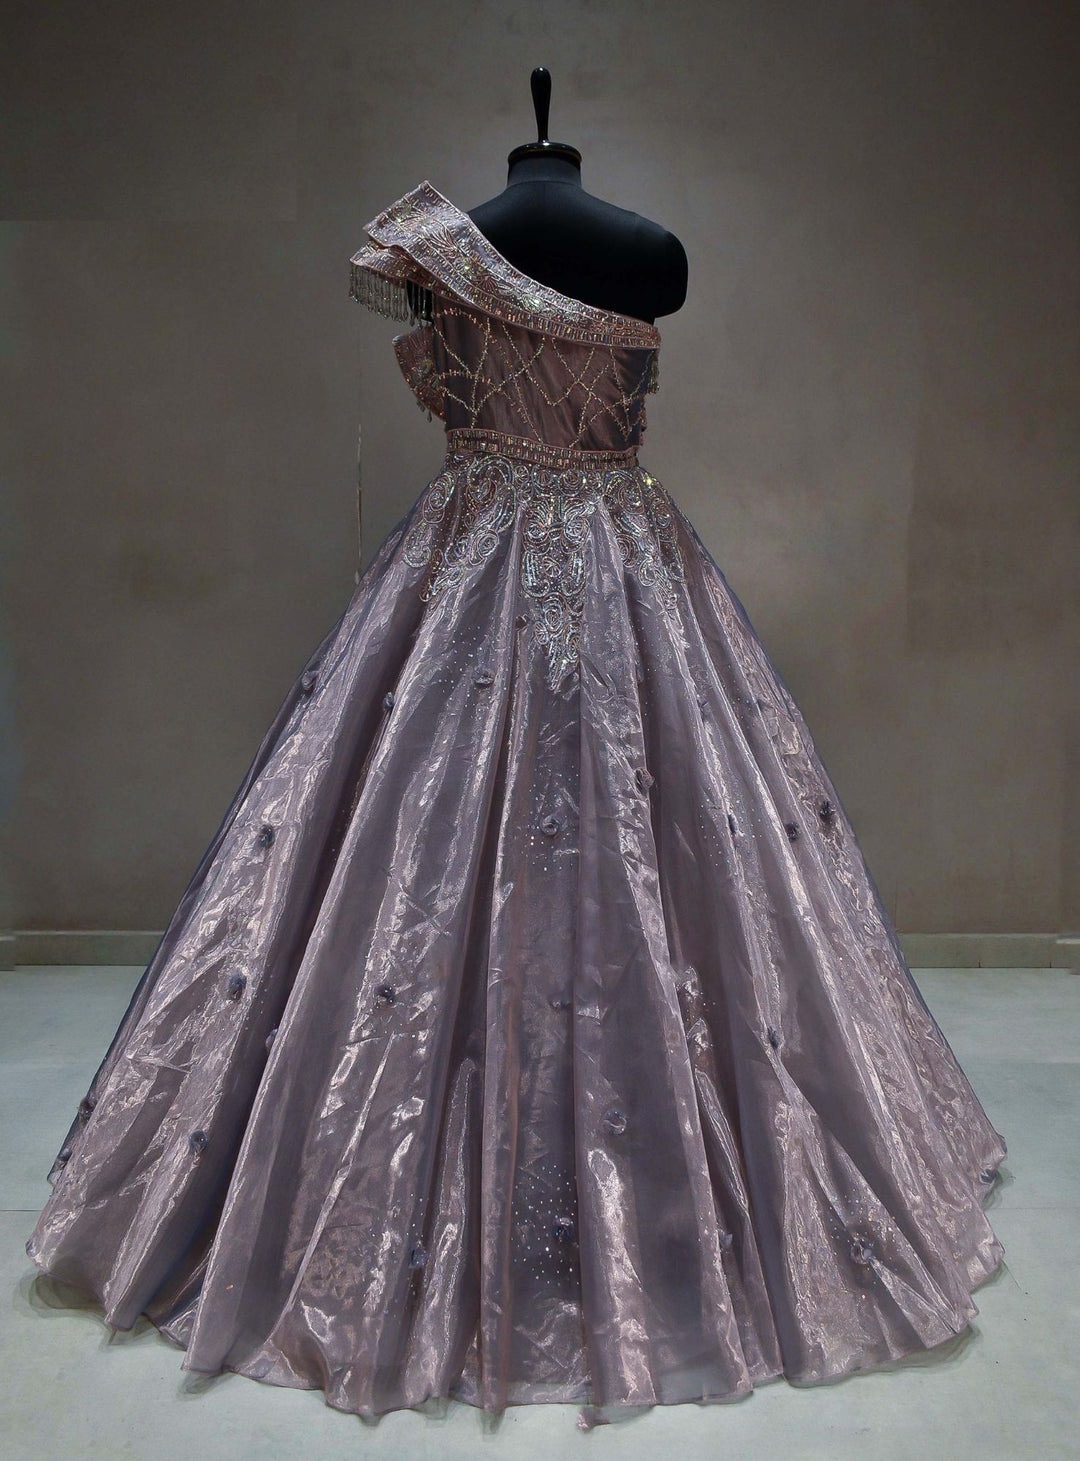 Meraj couture's Ruffled Glass Tissue Lavender Gown - RENT